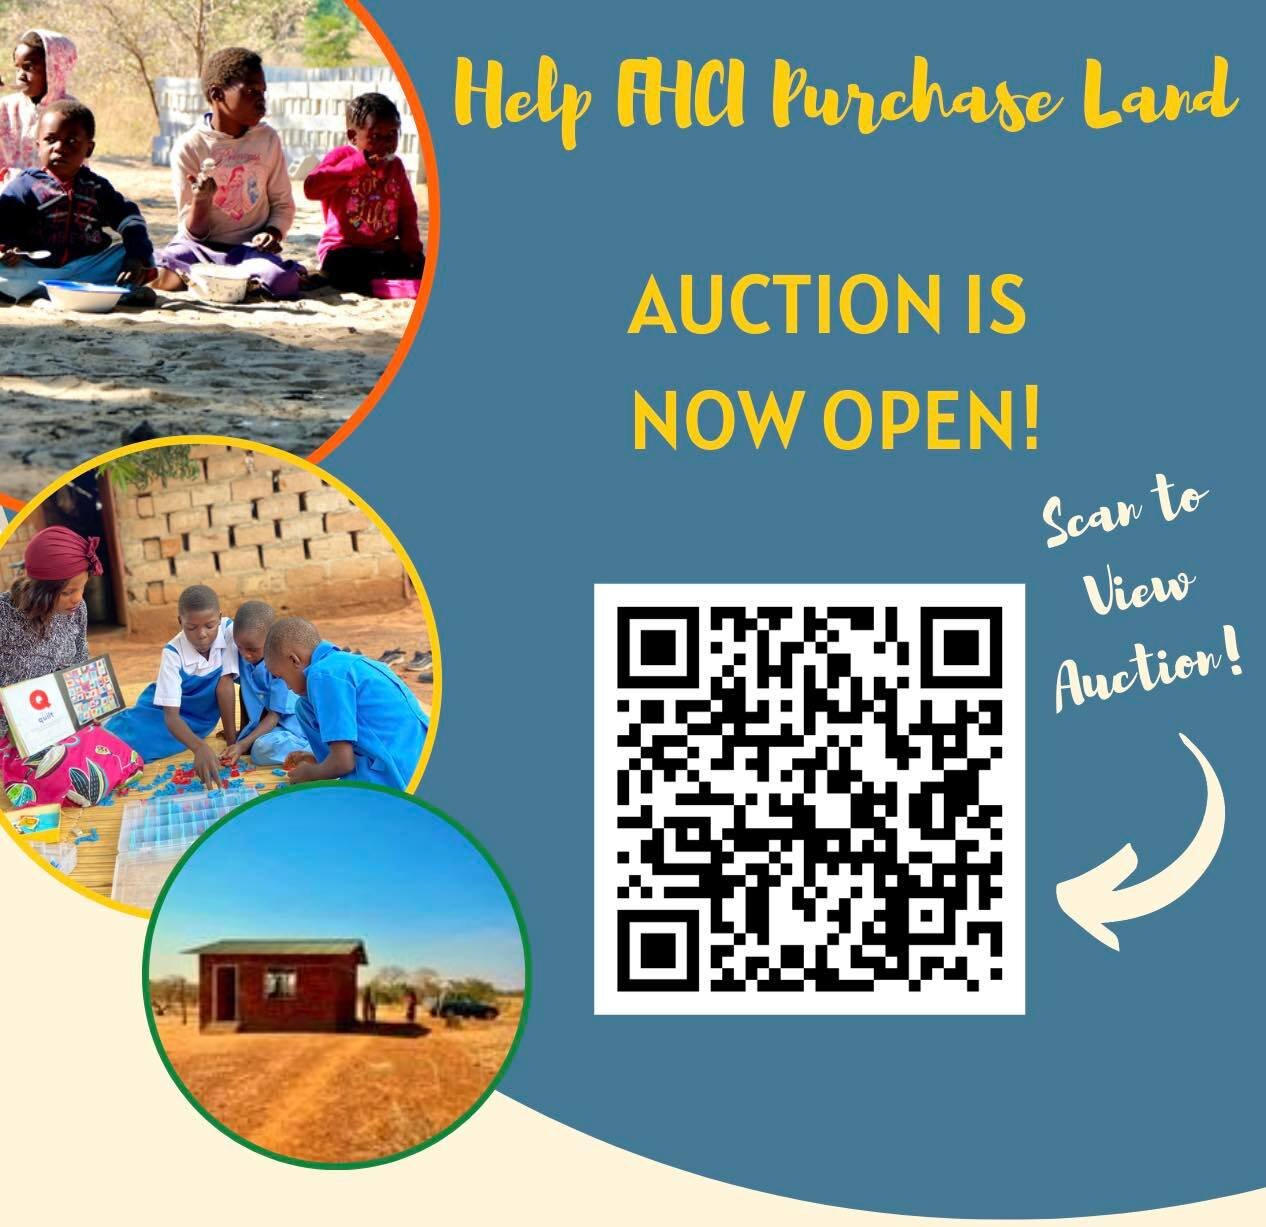 Our Global Online Auction is NOW OPEN! 

Scan the QR code to view the auction or follow the link below! 

http://fhci.betterworld.org/auctions/help-fhci-purchase-land

#NGO #nonprofit #community #fhci #freehavencommunityinitiative #africa #zambia #li